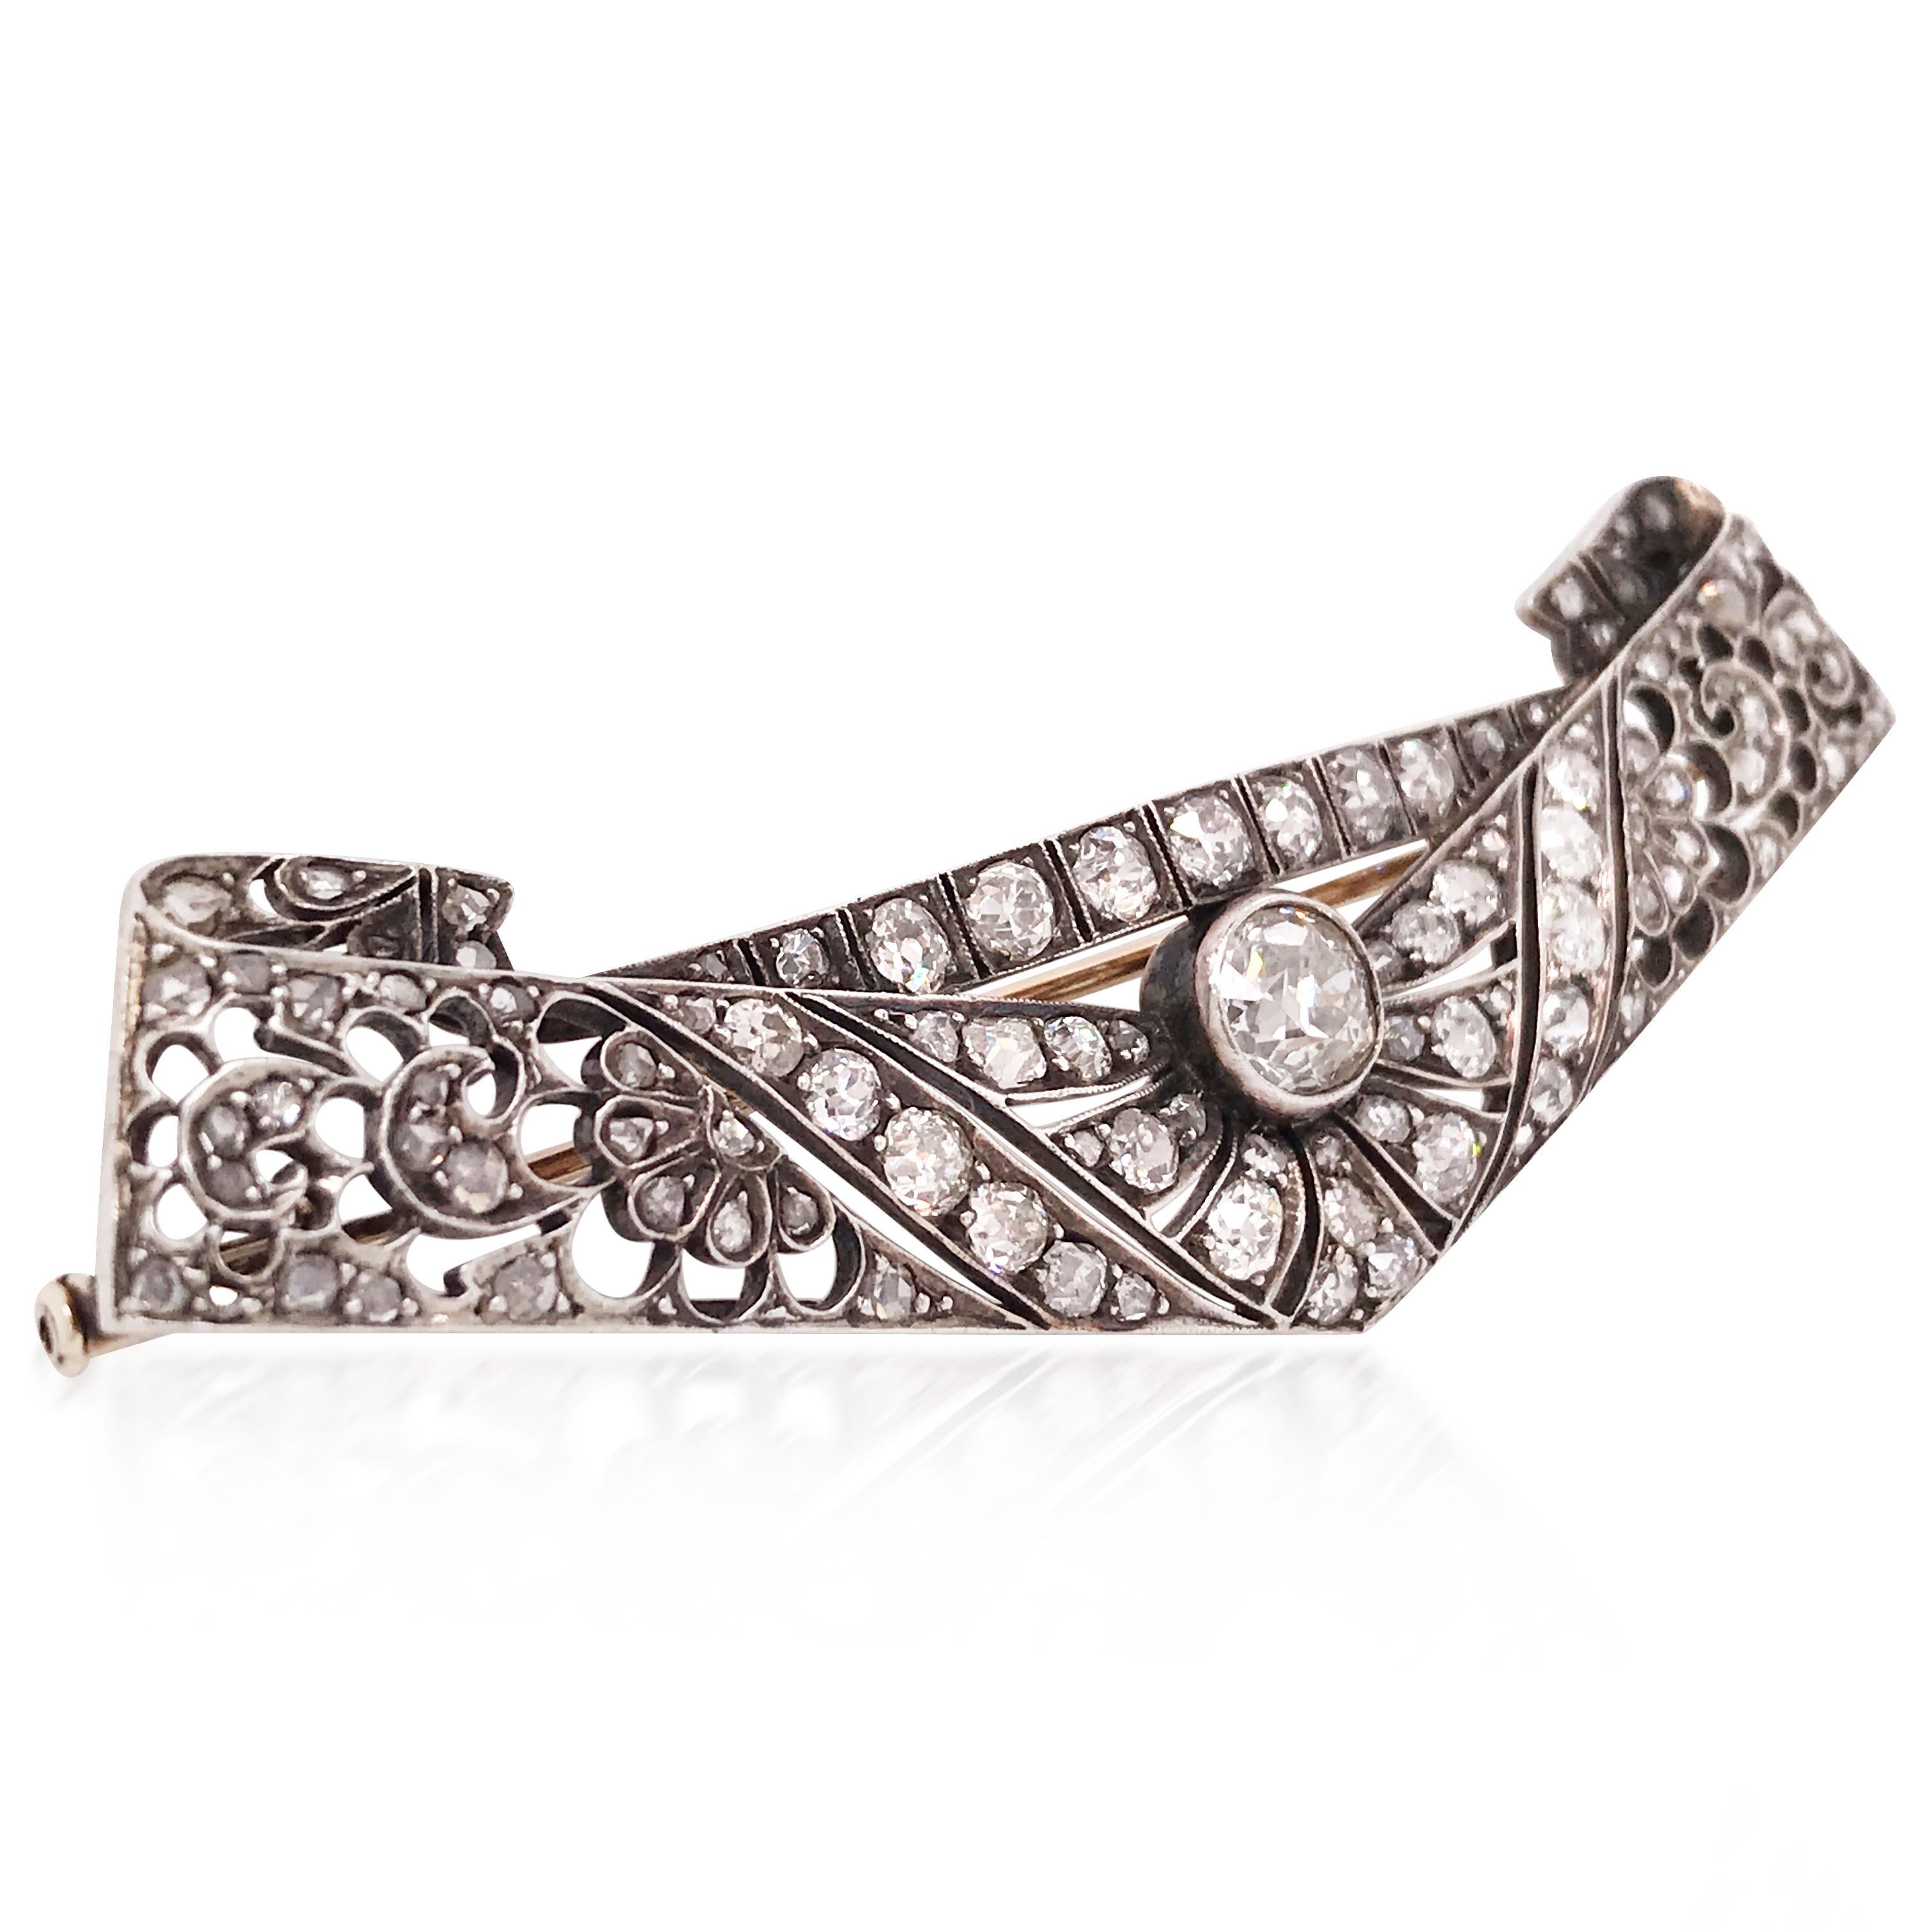 Silver brooch in a quadrangular shape, cut with interlocking geometric patterns and stylized feathers set with antique cut diamonds, cut in roses, centered with a larger round diamond. Circa 1920s.

Measurement: length 7cm
Weight: 10.3 grams